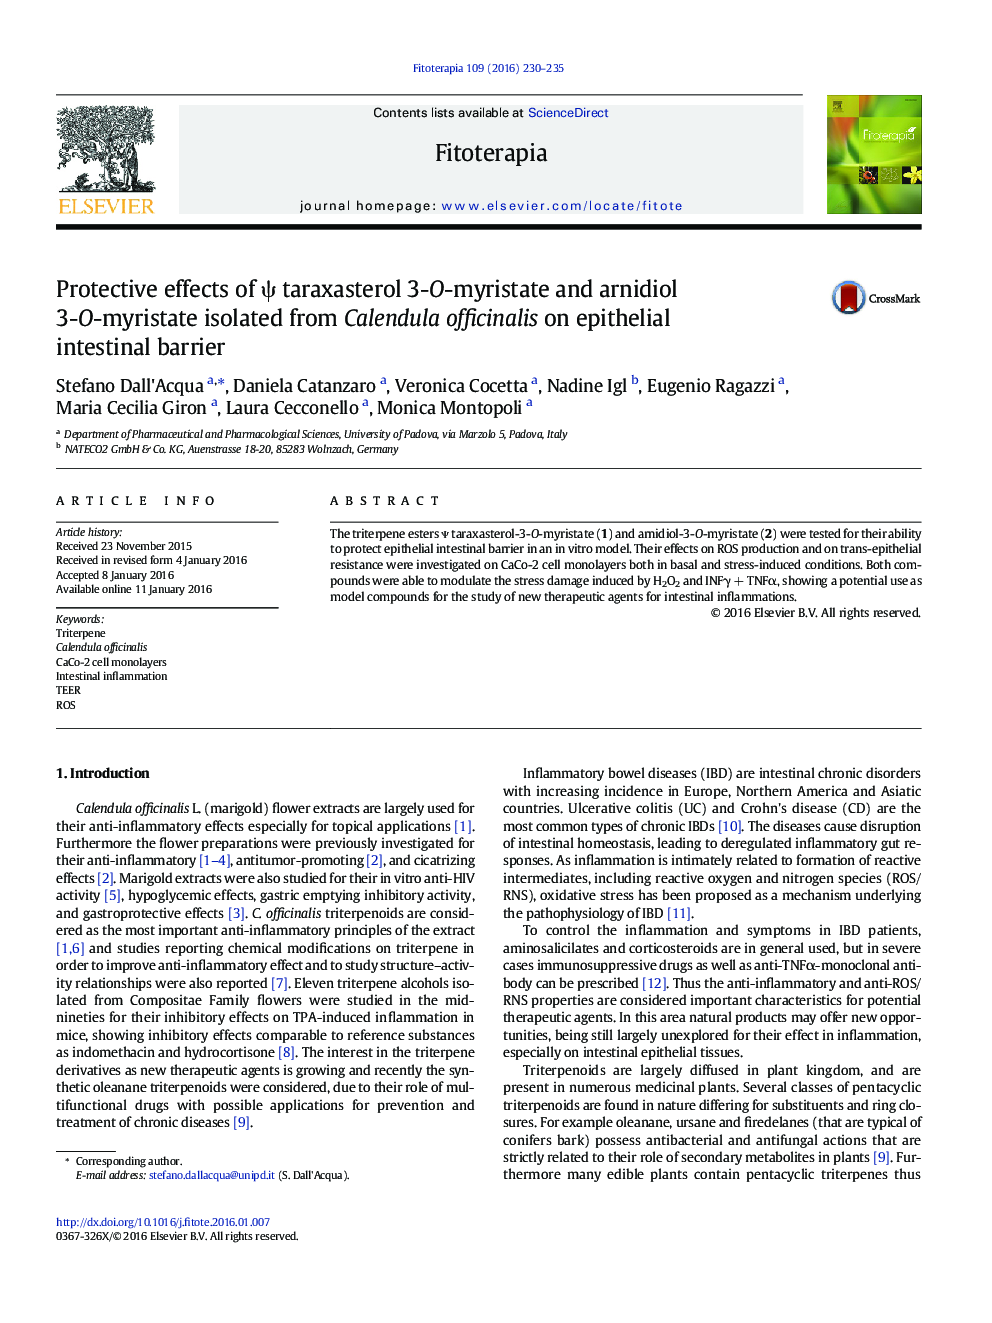 Protective effects of ψ taraxasterol 3-O-myristate and arnidiol 3-O-myristate isolated from Calendula officinalis on epithelial intestinal barrier